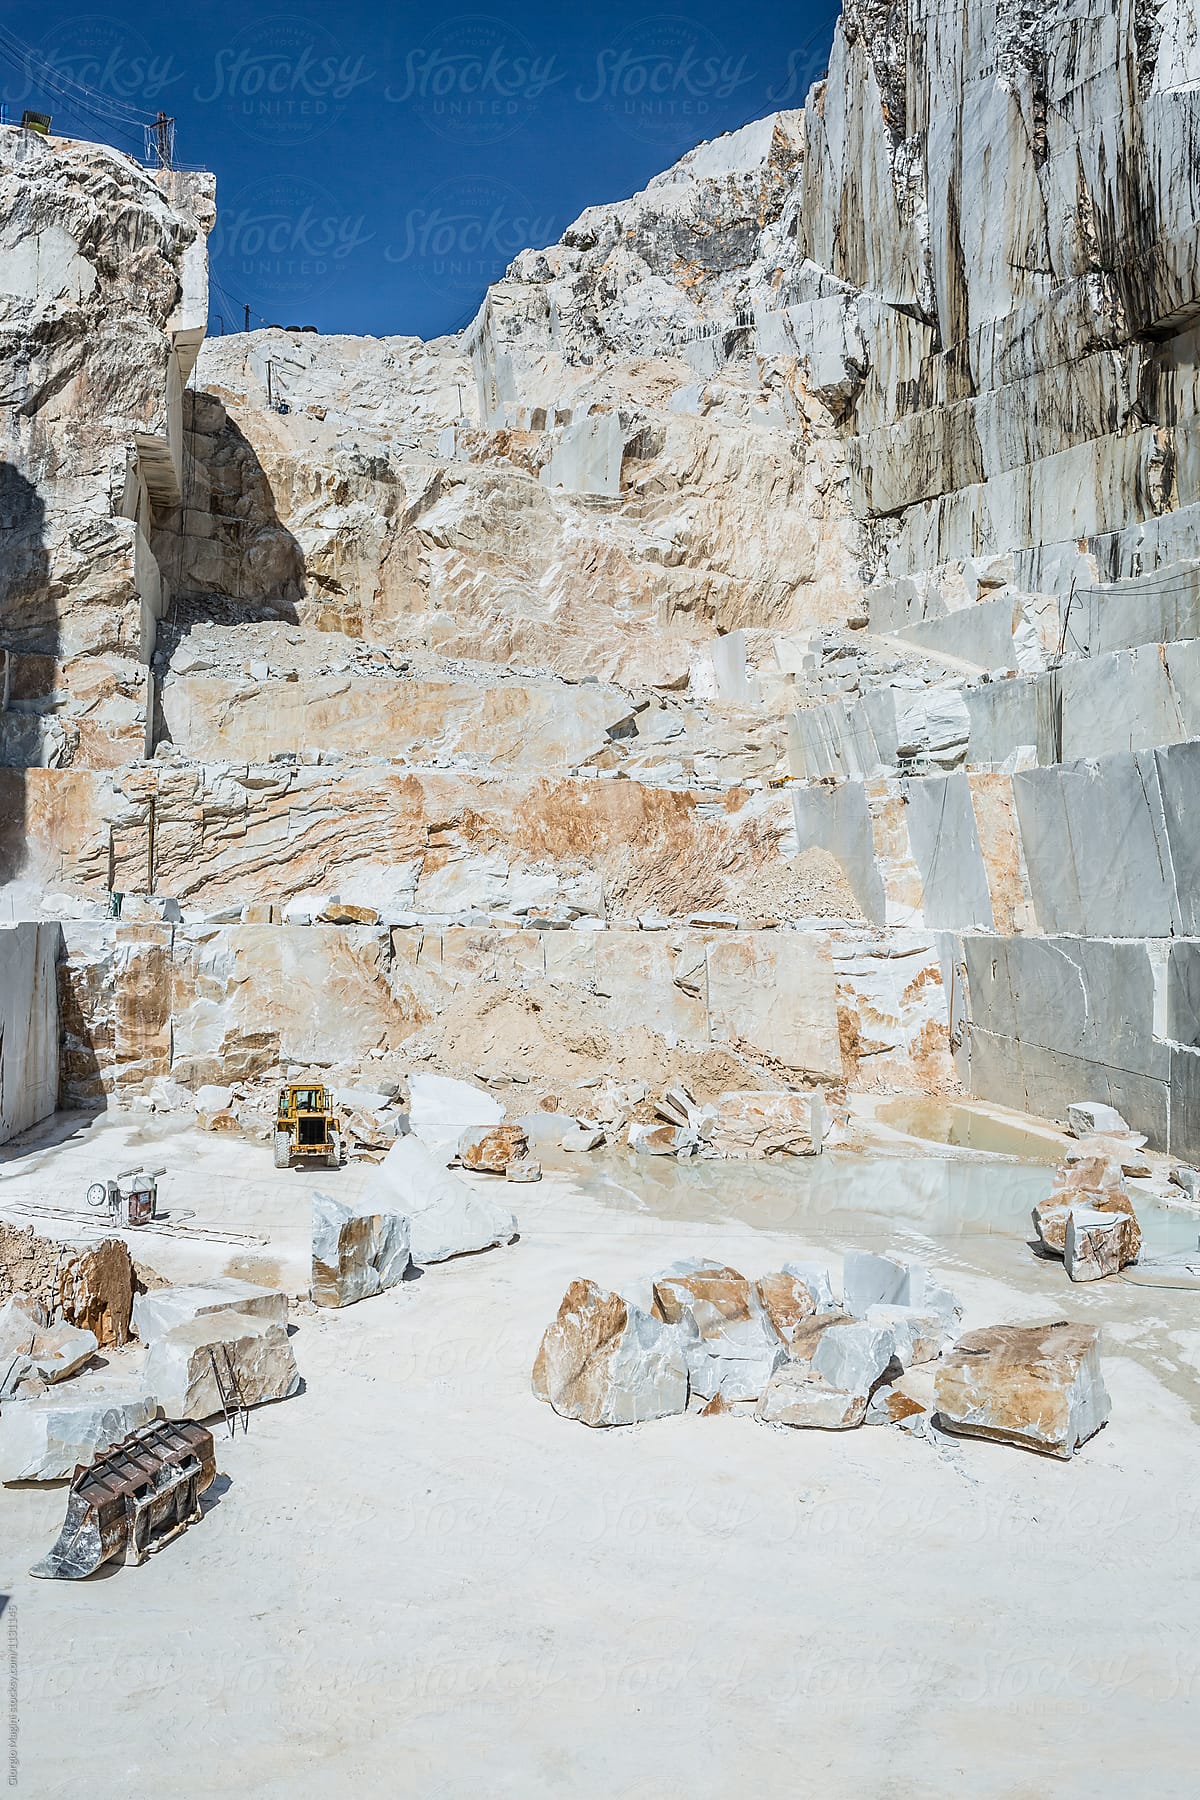 Marble Quarry Site in Tuscany, Italy